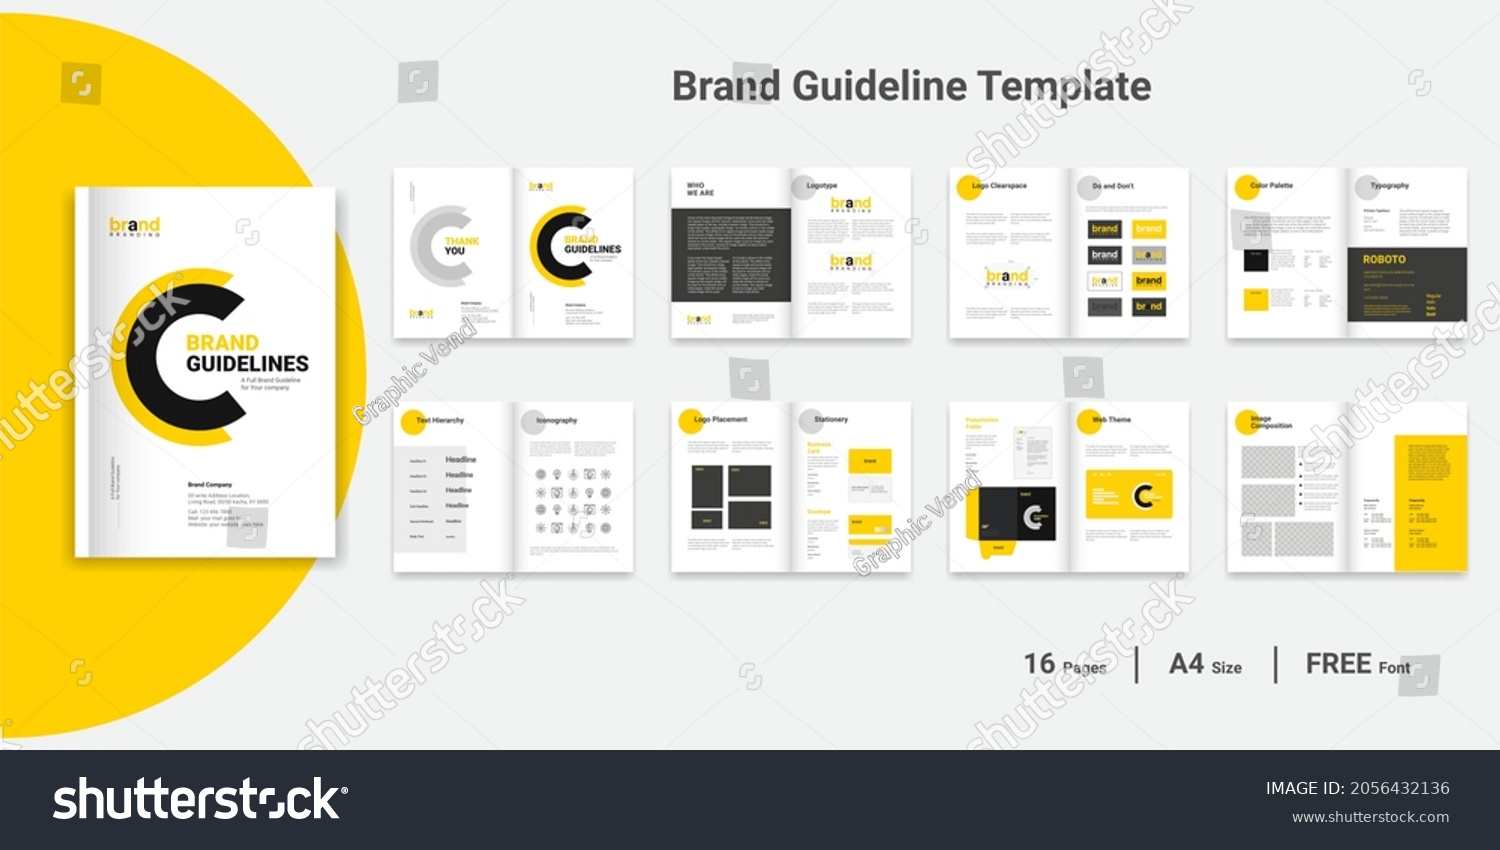 Brand Guideline template Brand Guidelines Brand Style Guidelines Brand Manual	 #2056432136